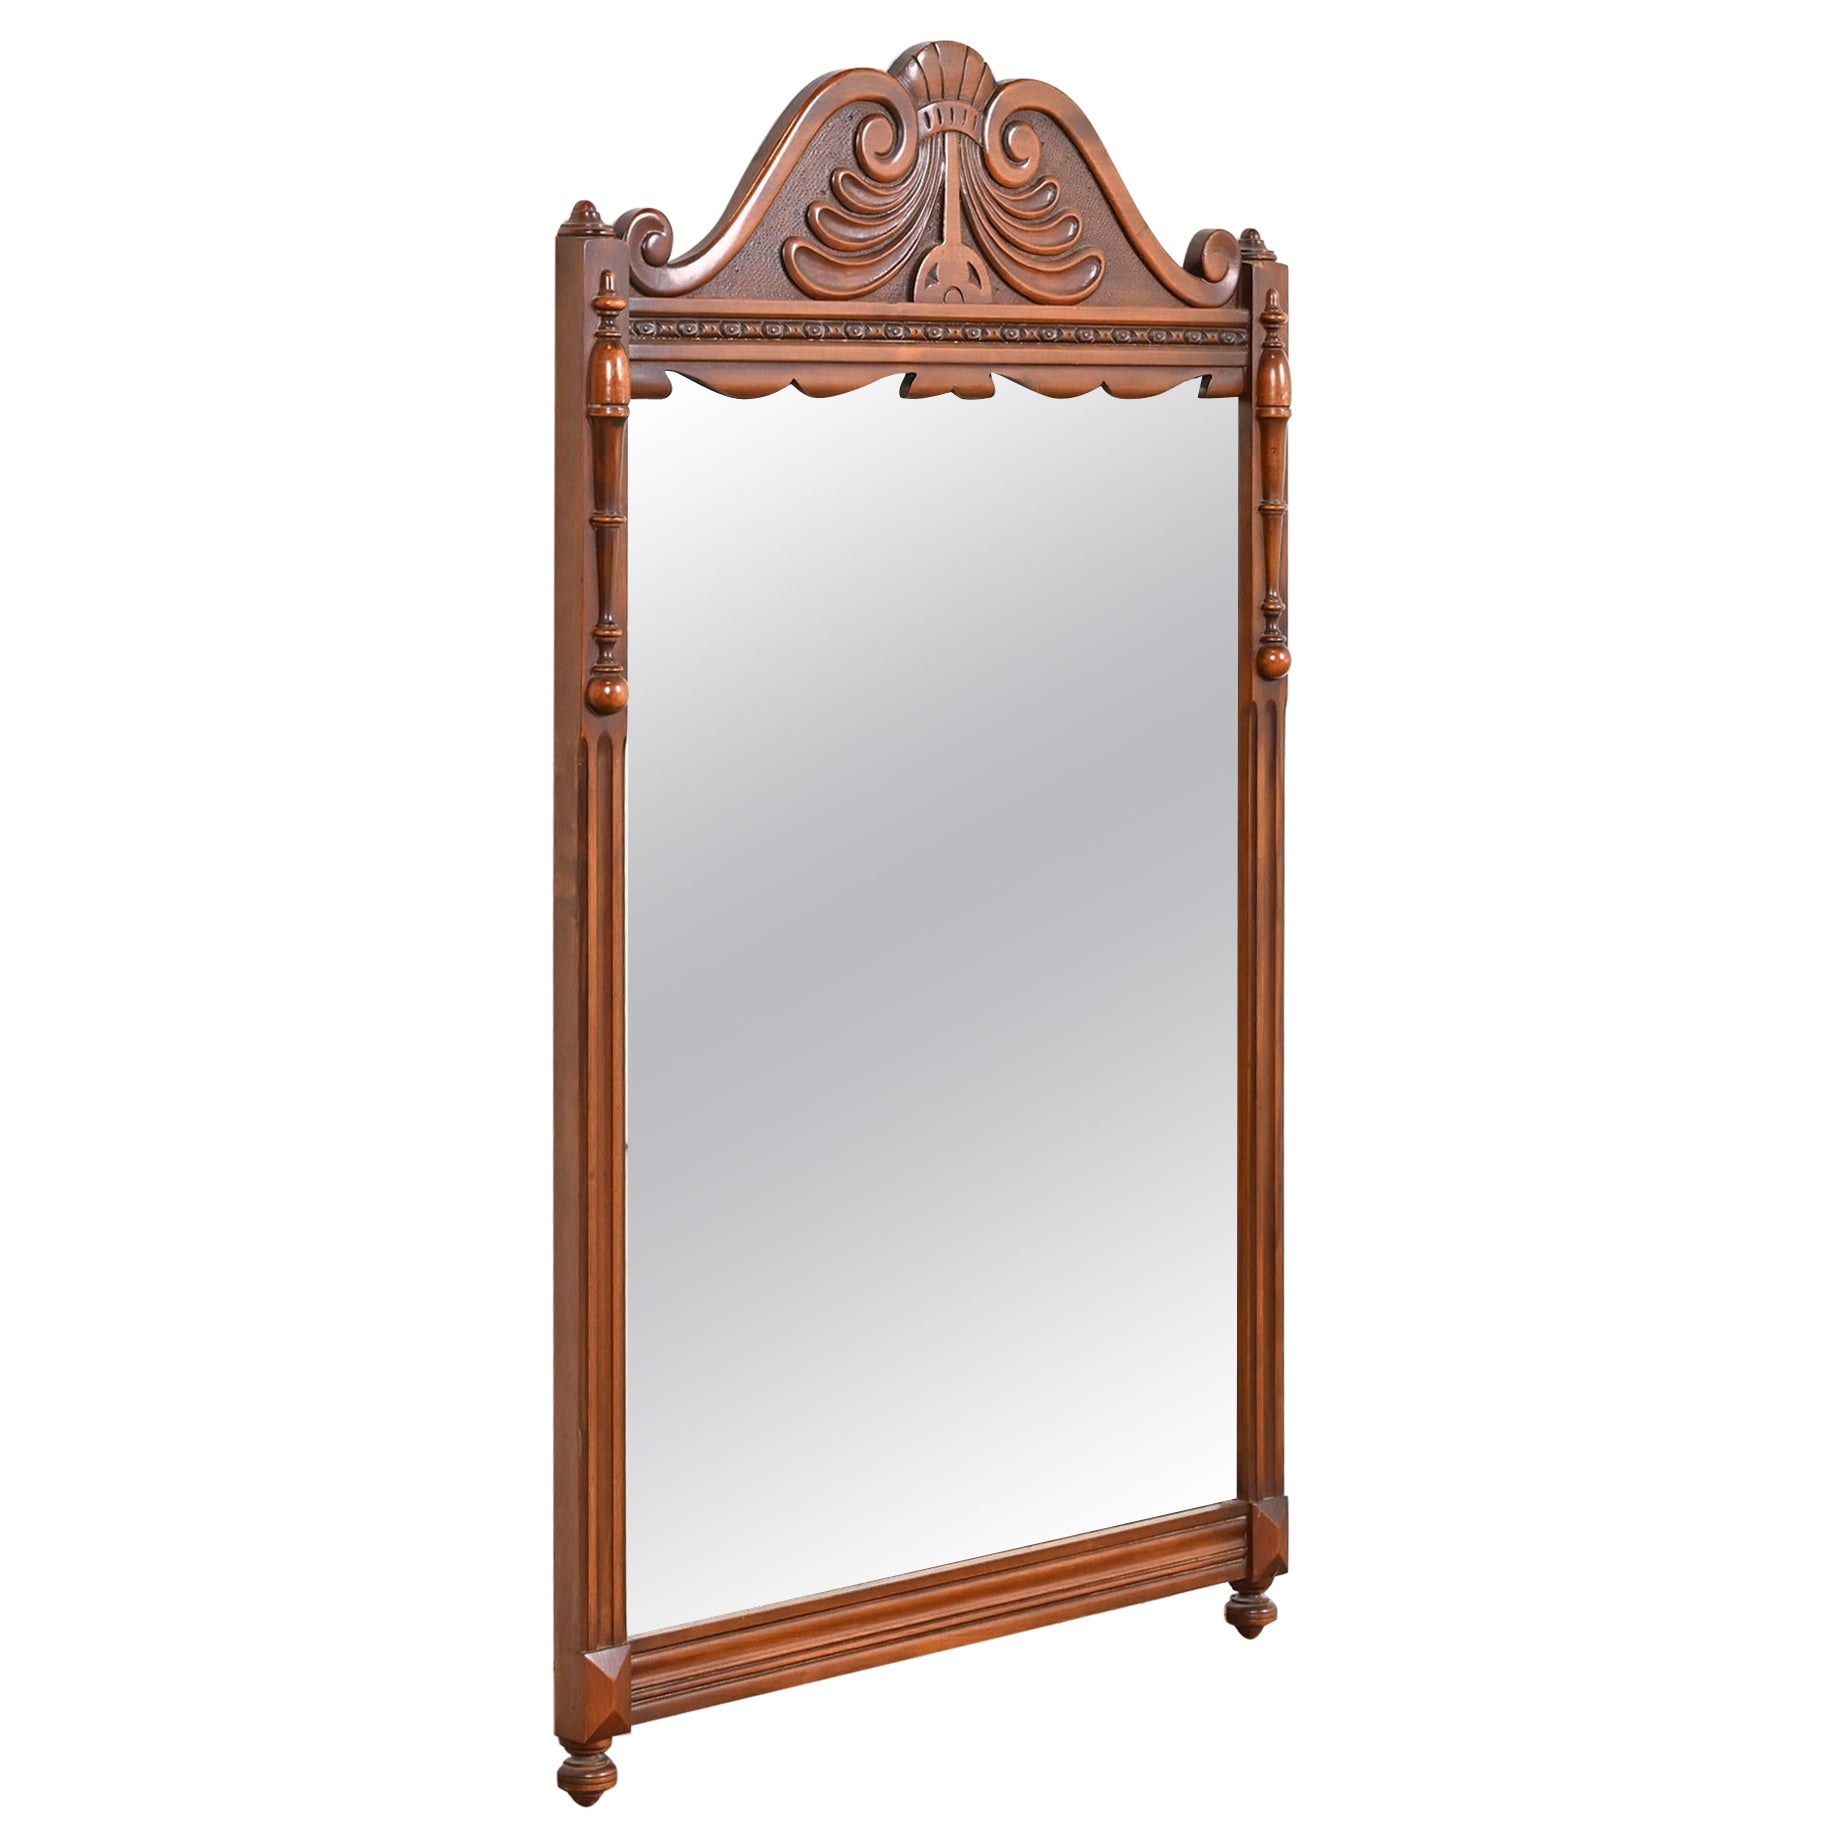 French Art Deco Carved Walnut Wall Mirror by Landstrom, Circa 1940s